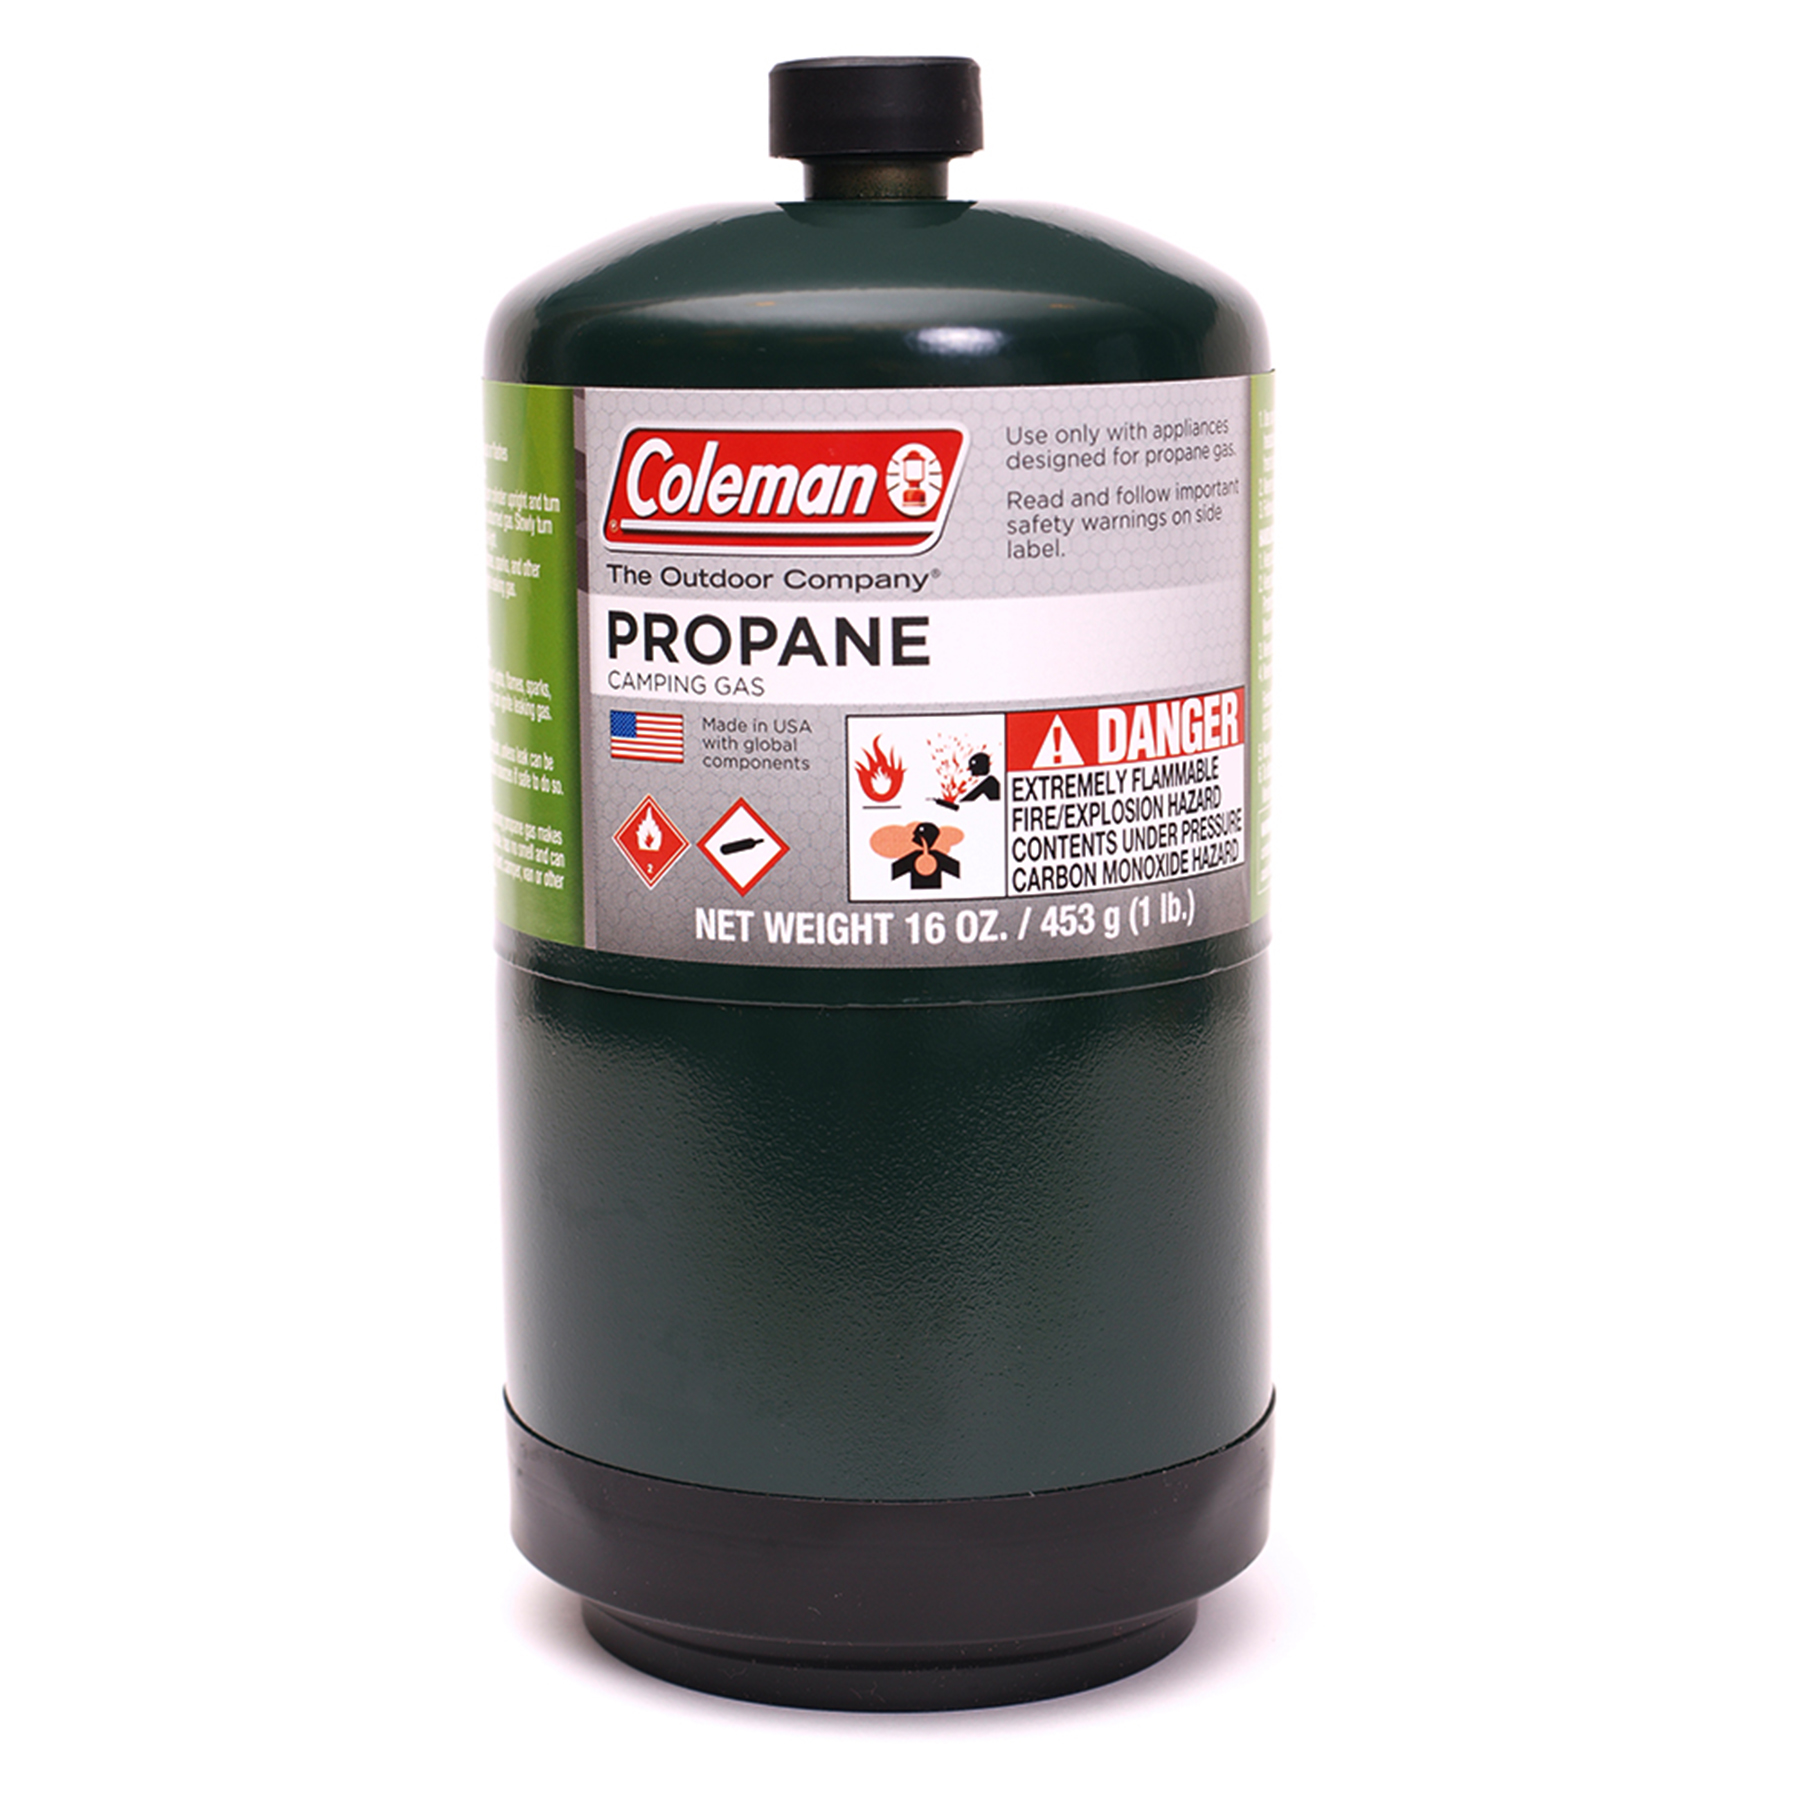 FUEL  1-lb Propane Canister